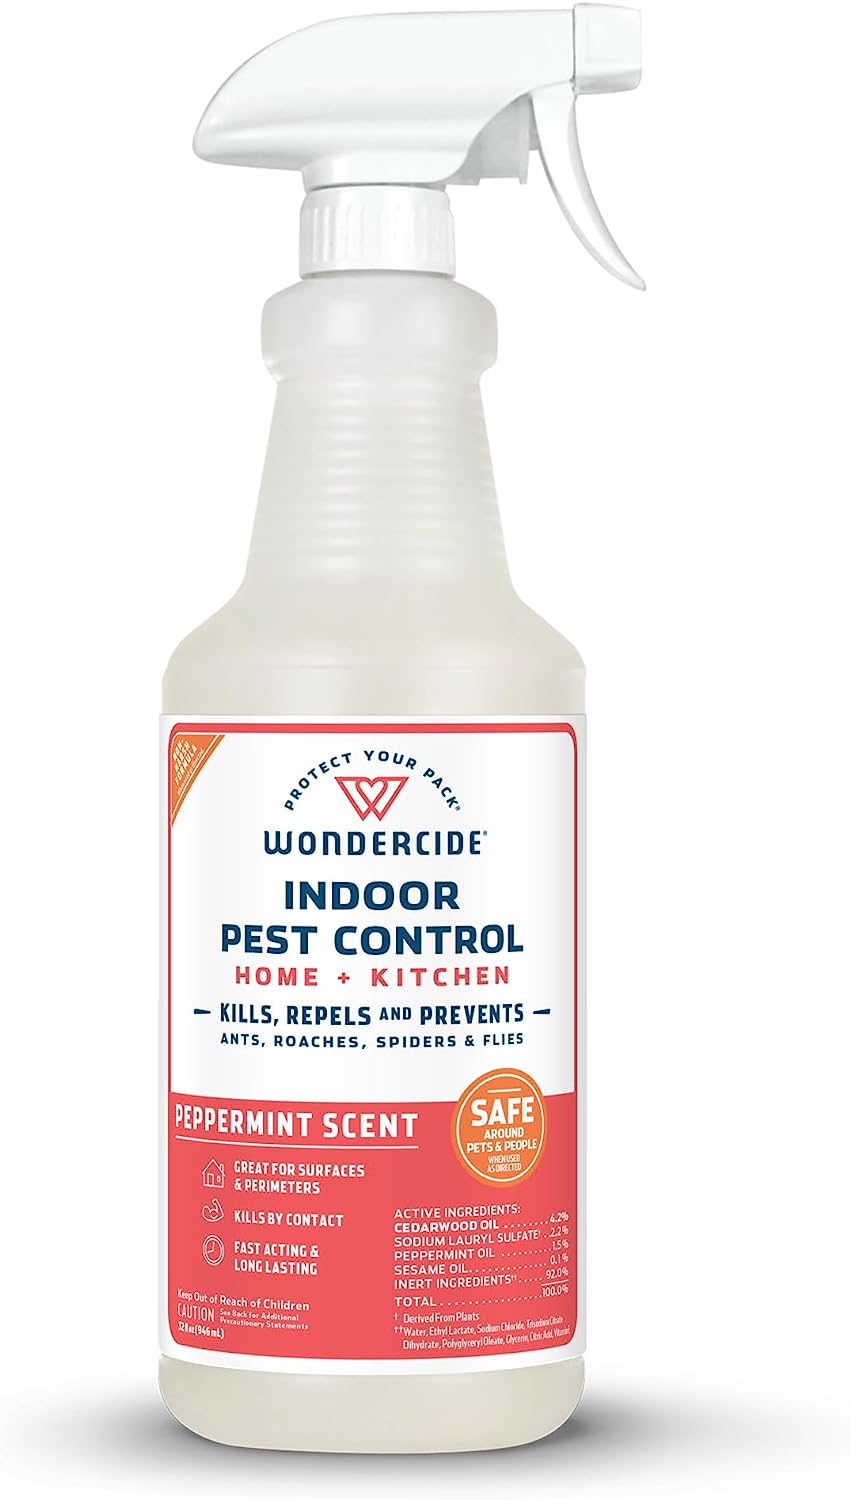 Wondercide - Indoor Pest Control Spray for Home and [...]